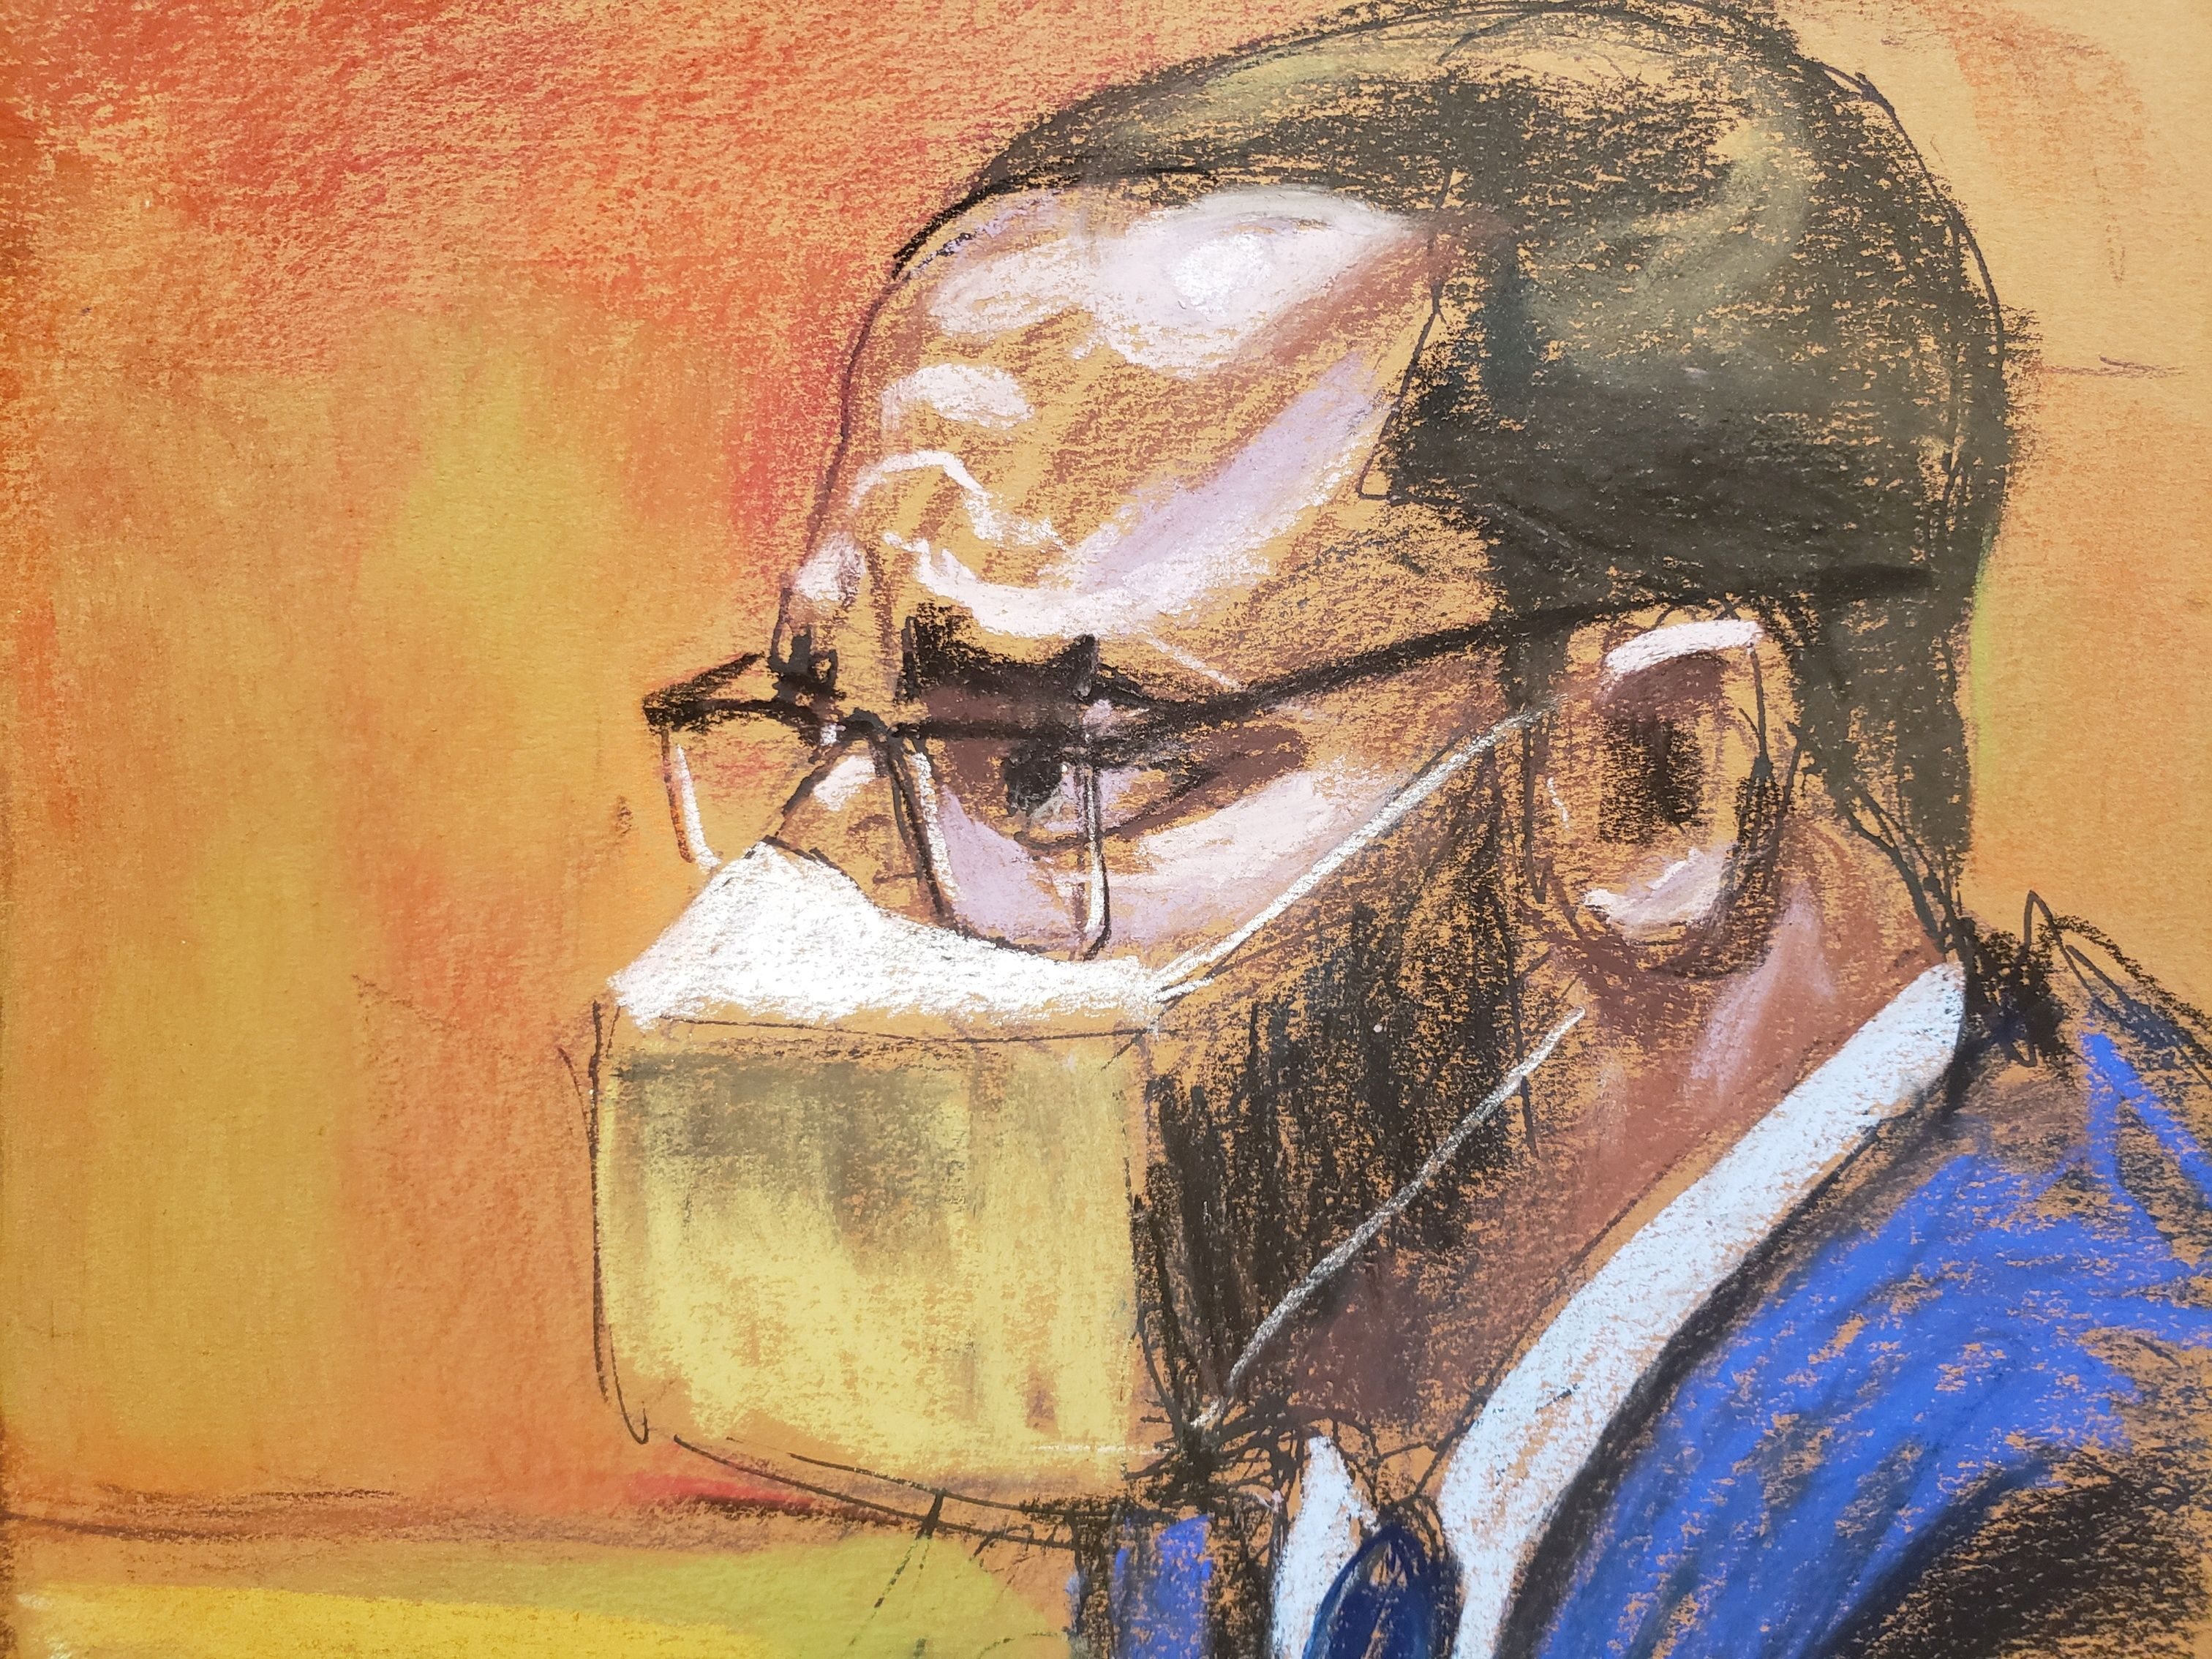 Woman testifies about R. Kelly pressuring her to have sex